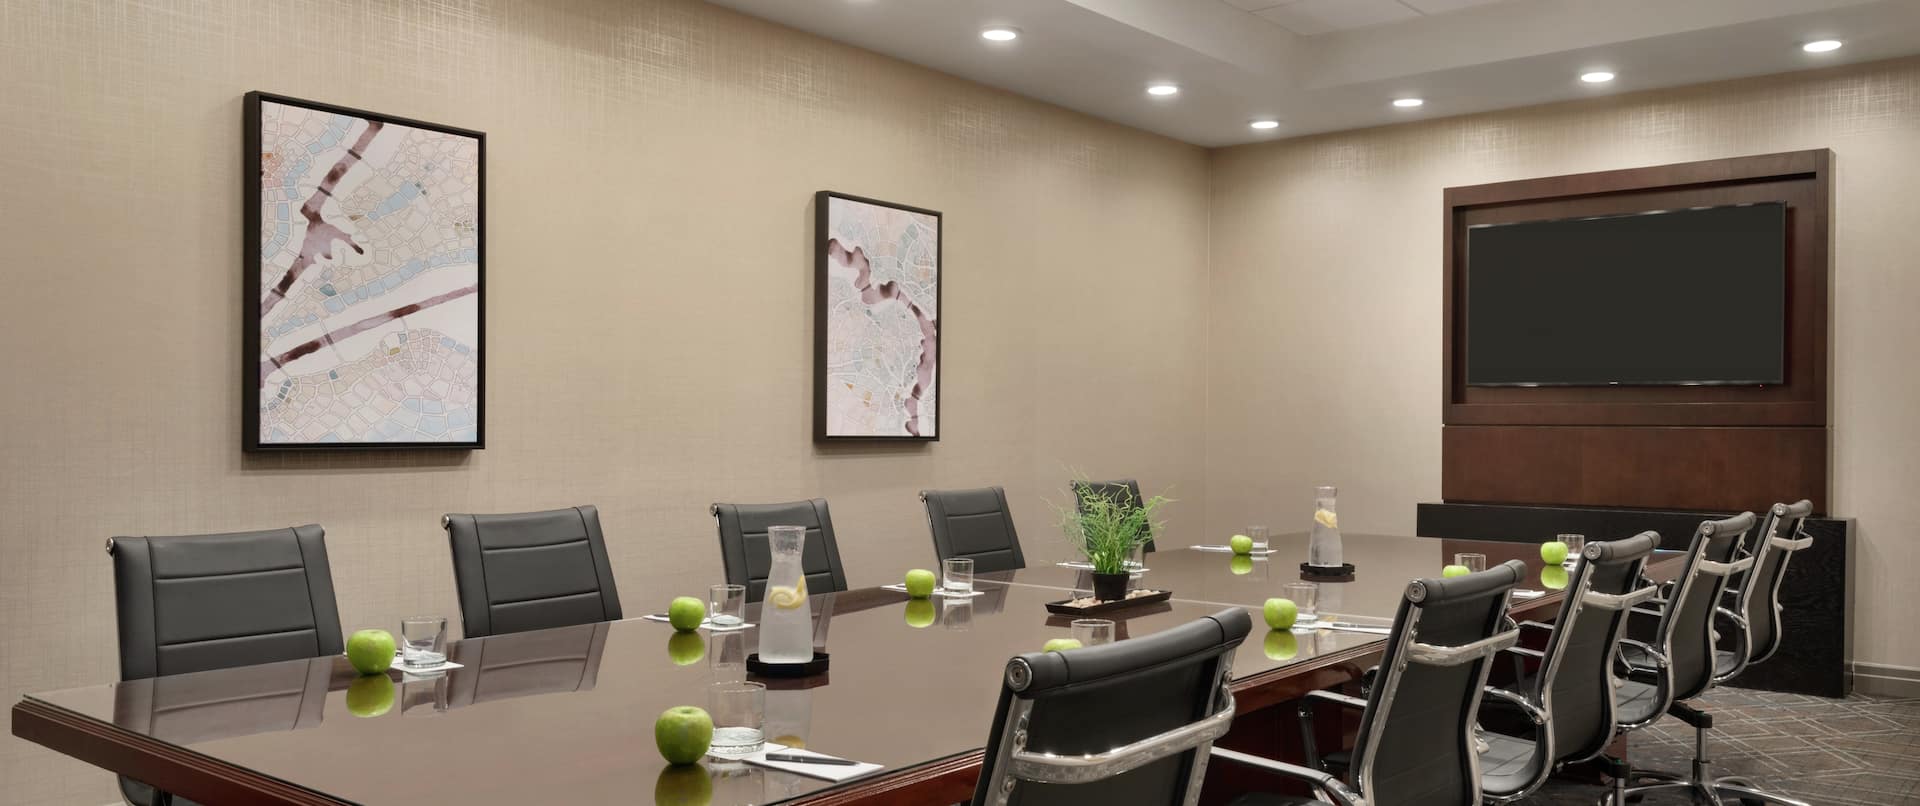 Embassy Suites Taylor Boardroom with Tables, Chairs, and Room Technology